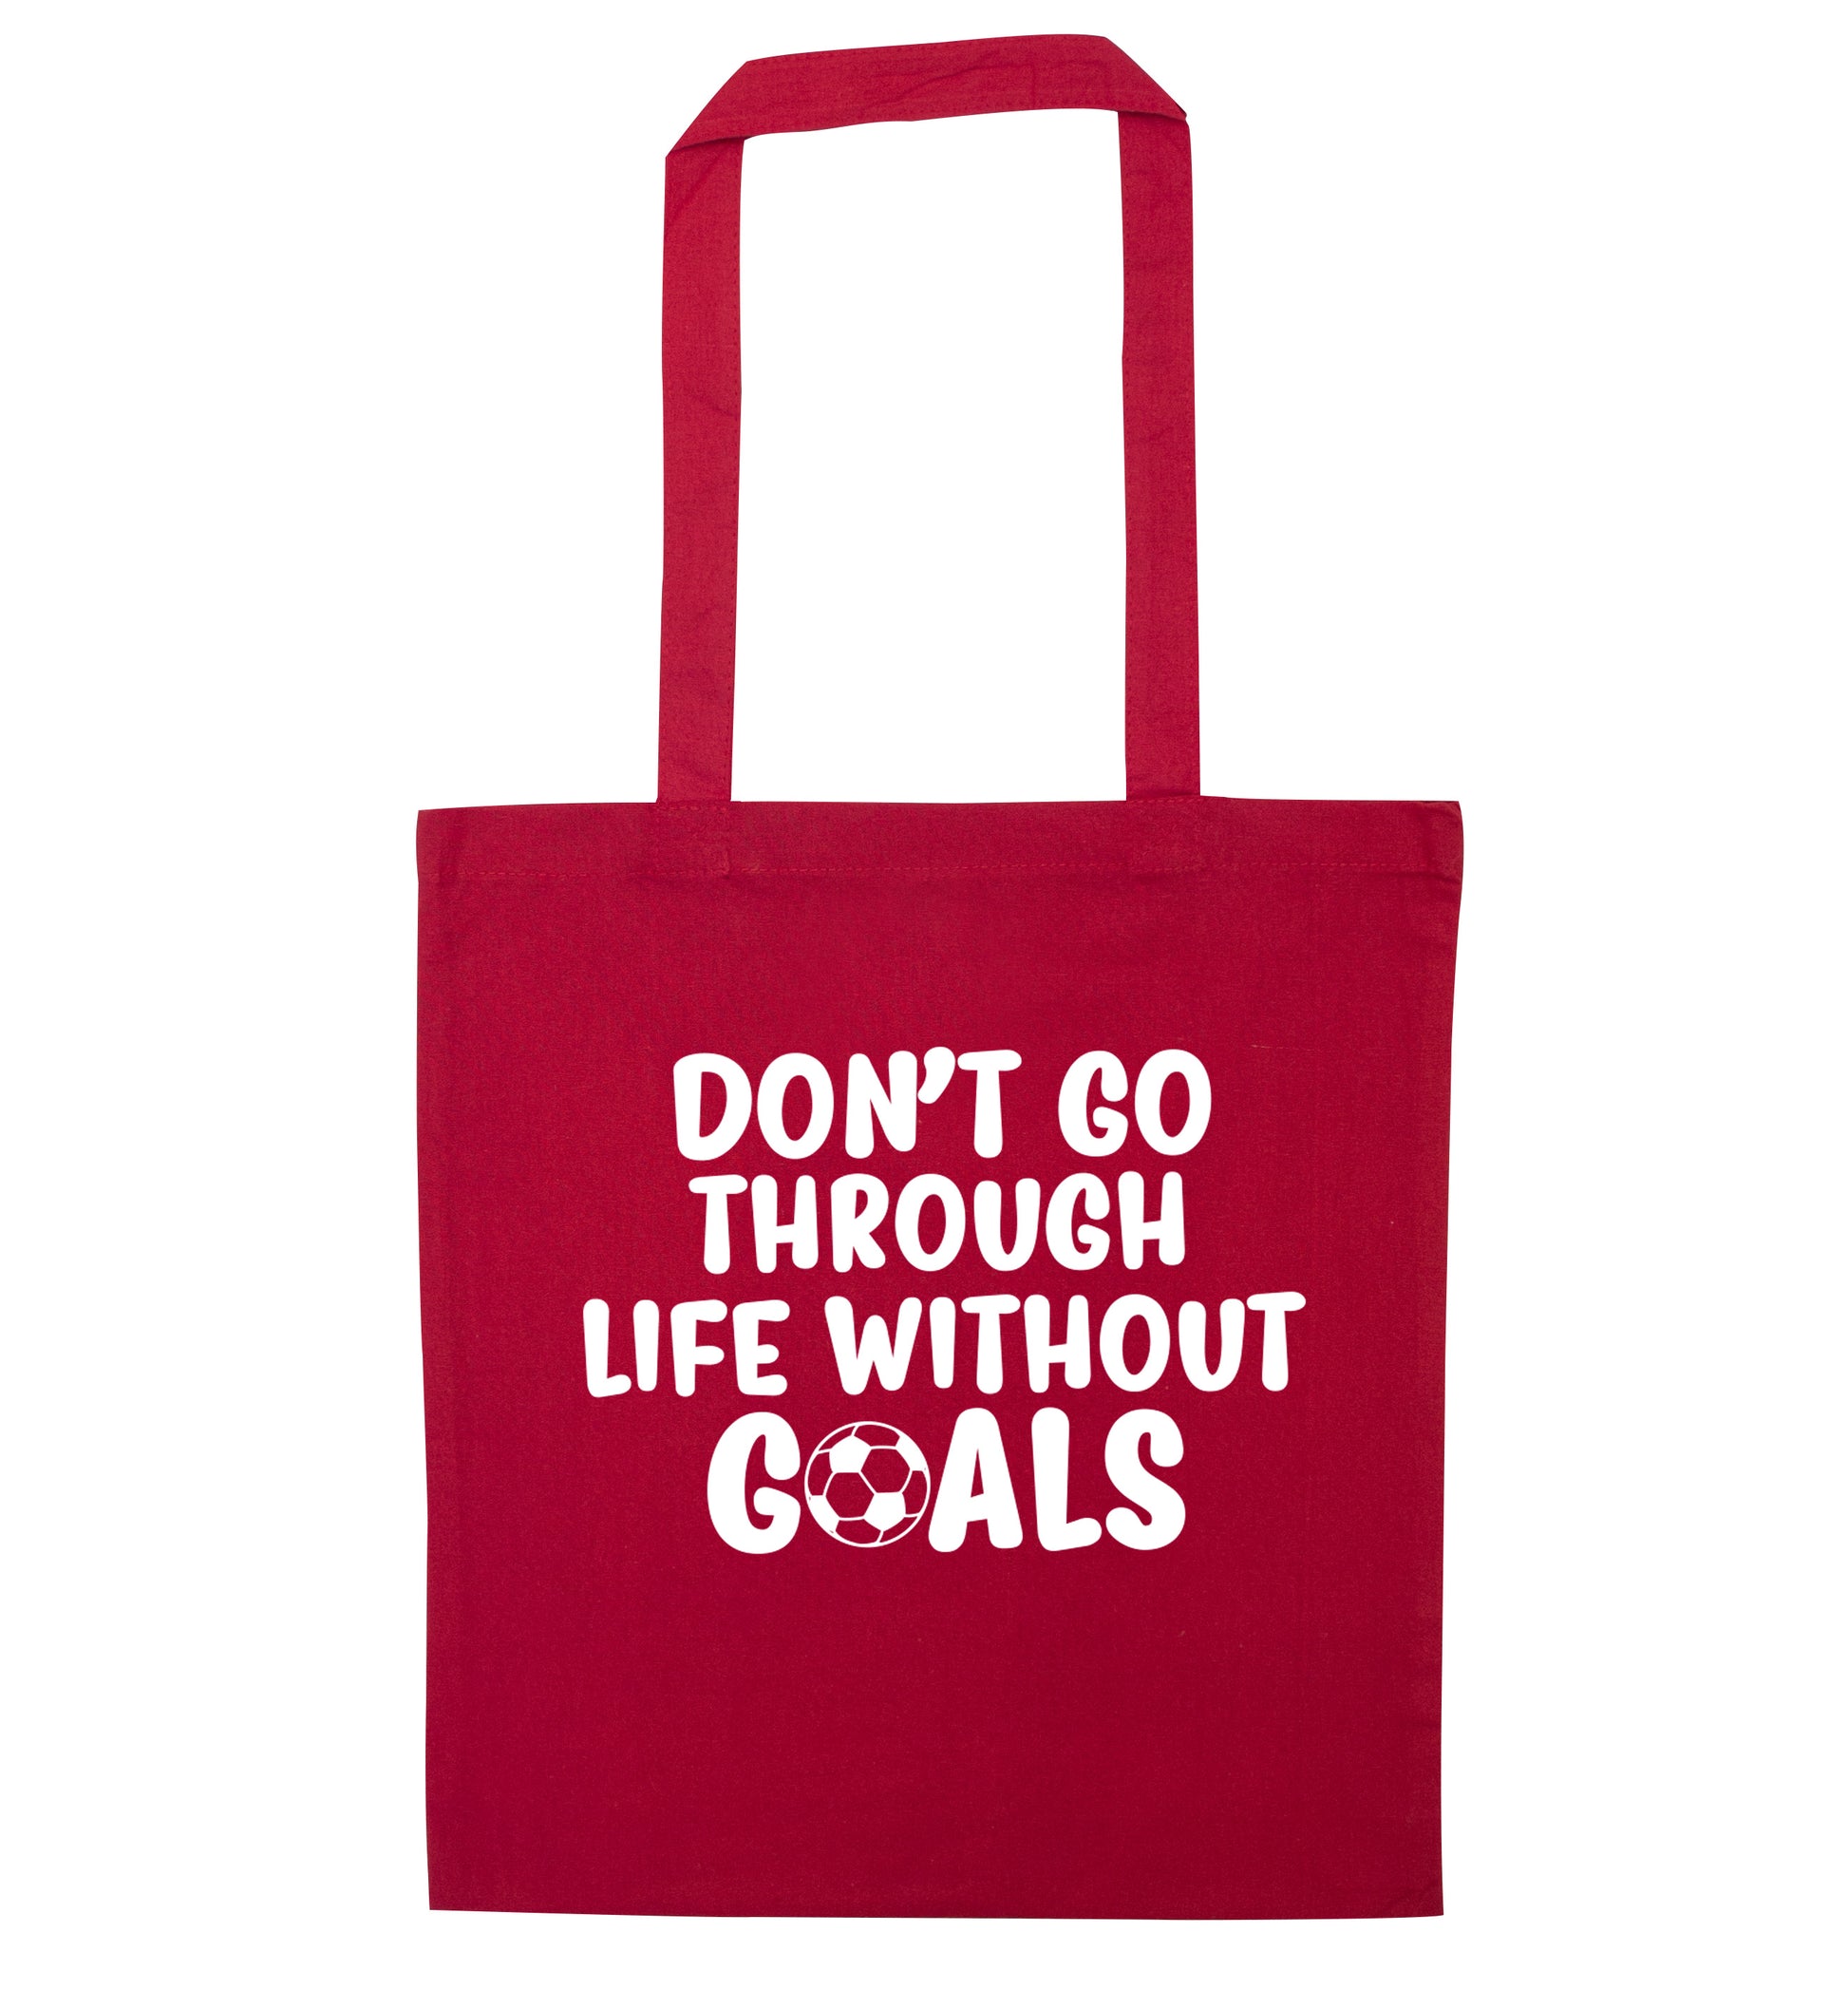 Don't go through life without goals red tote bag